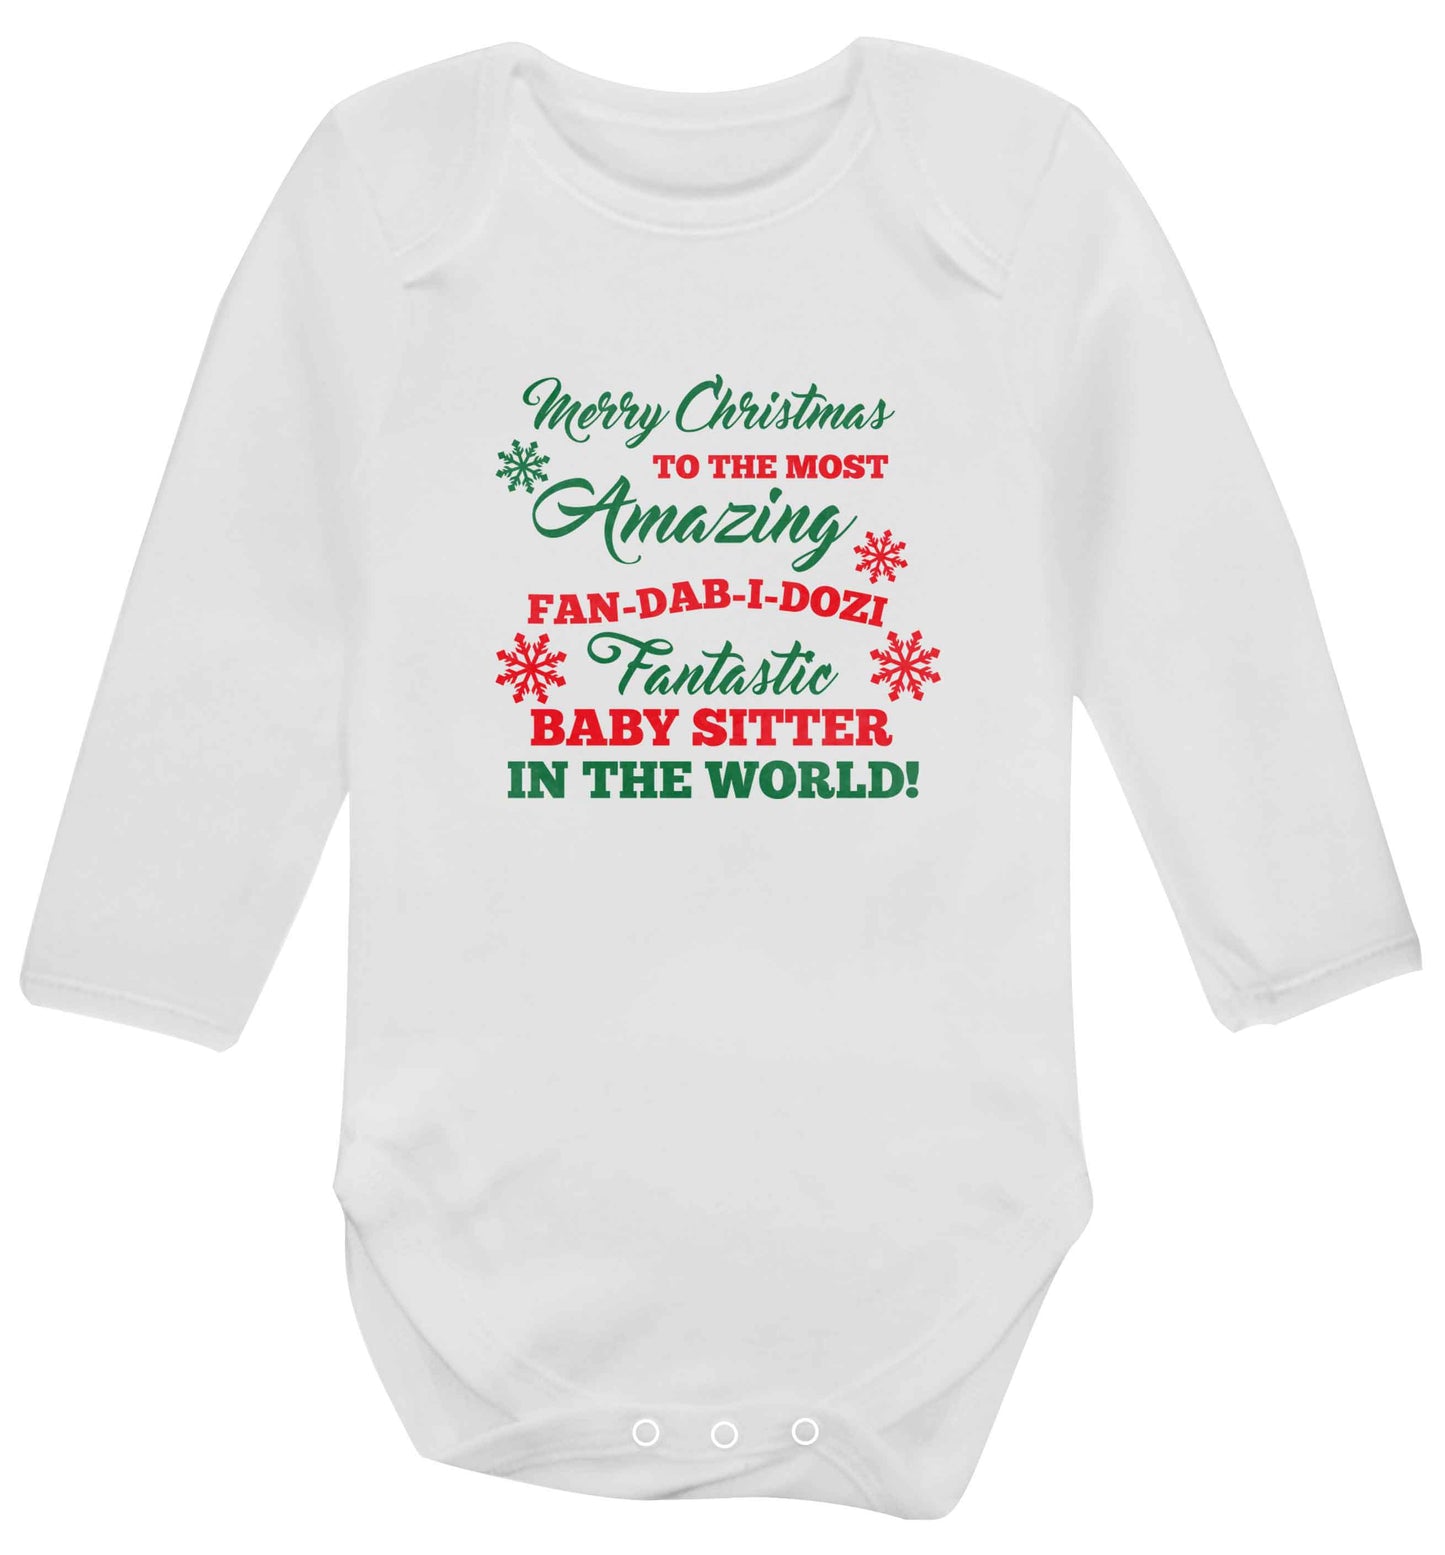 Merry Christmas to the most amazing fan-dab-i-dozi fantasic baby sitter in the world baby vest long sleeved white 6-12 months